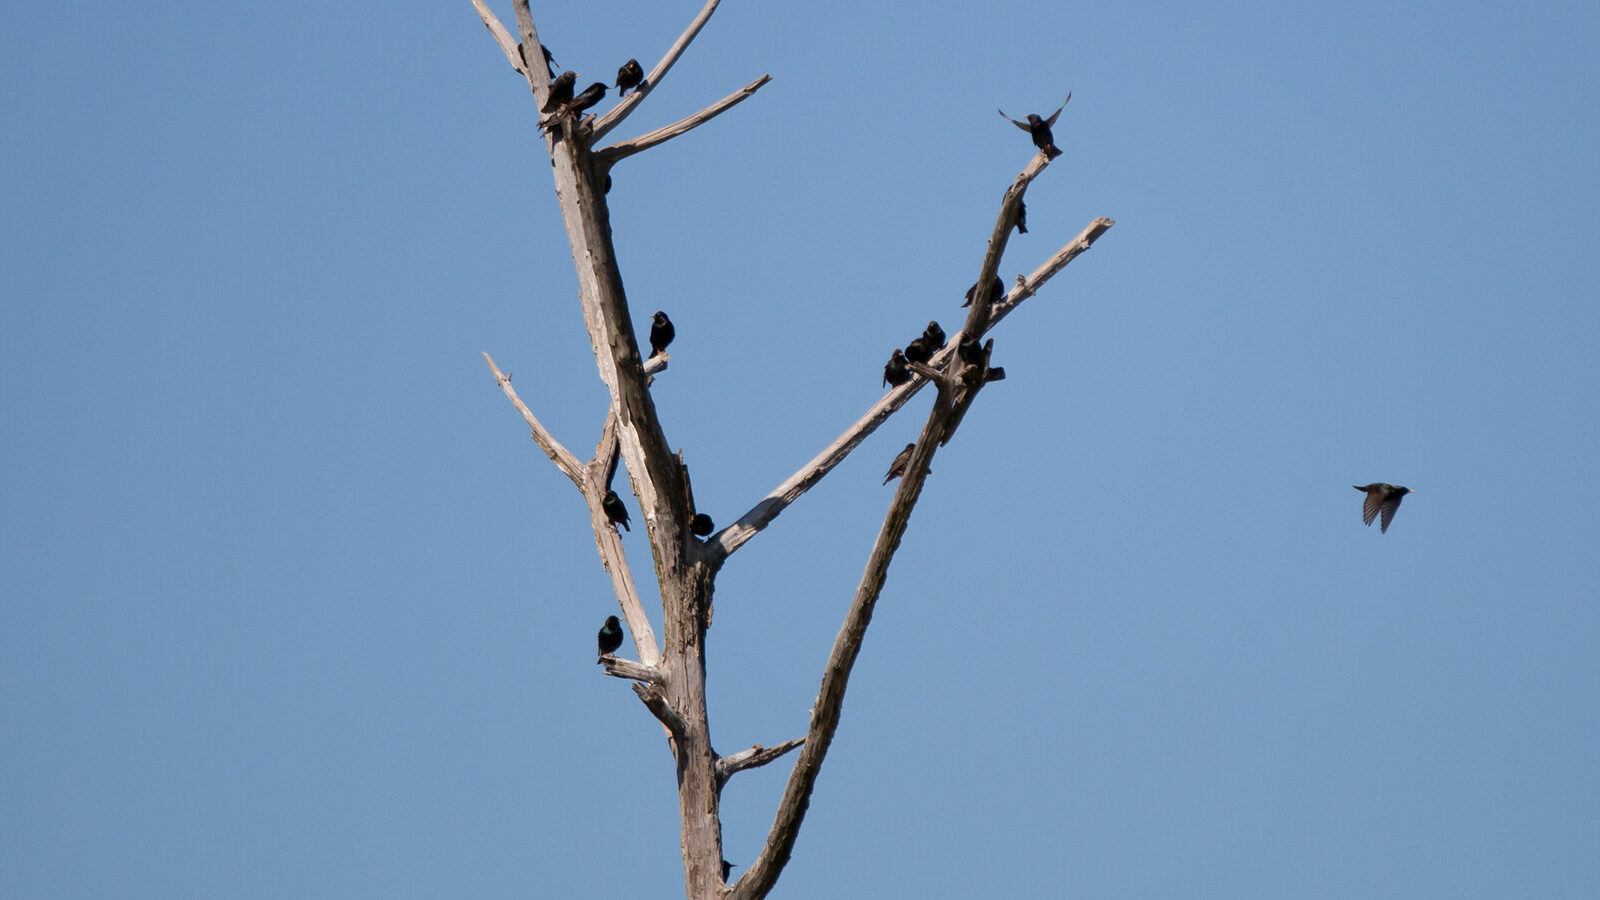 European starlings landing and flying from a dead tree